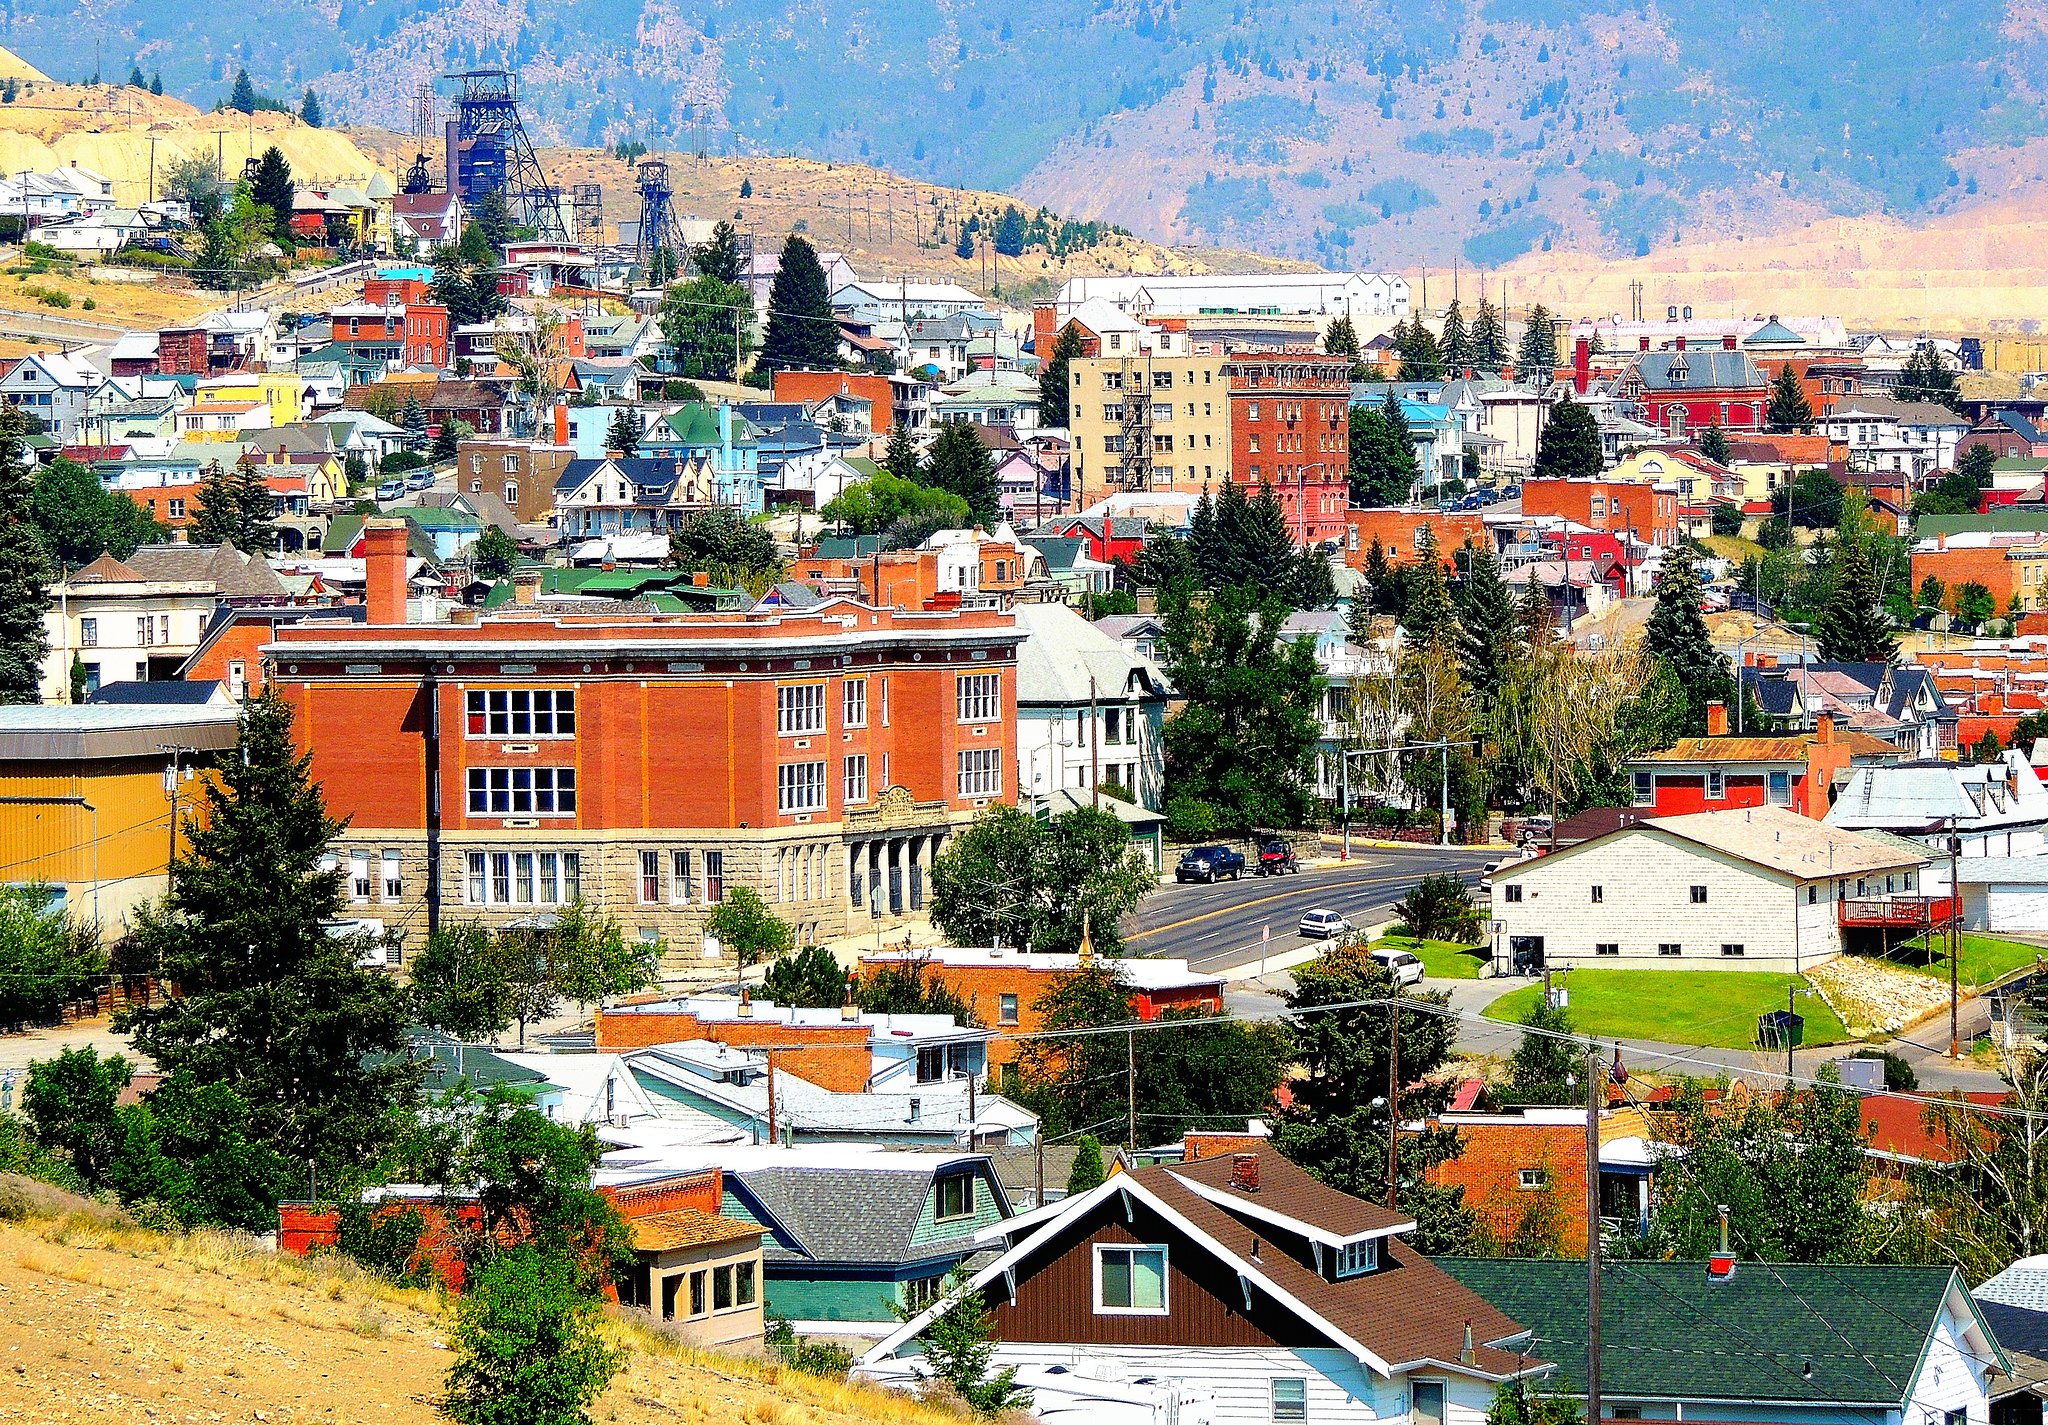 35 fantastic photos of Butte in Montana, US BOOMSbeat